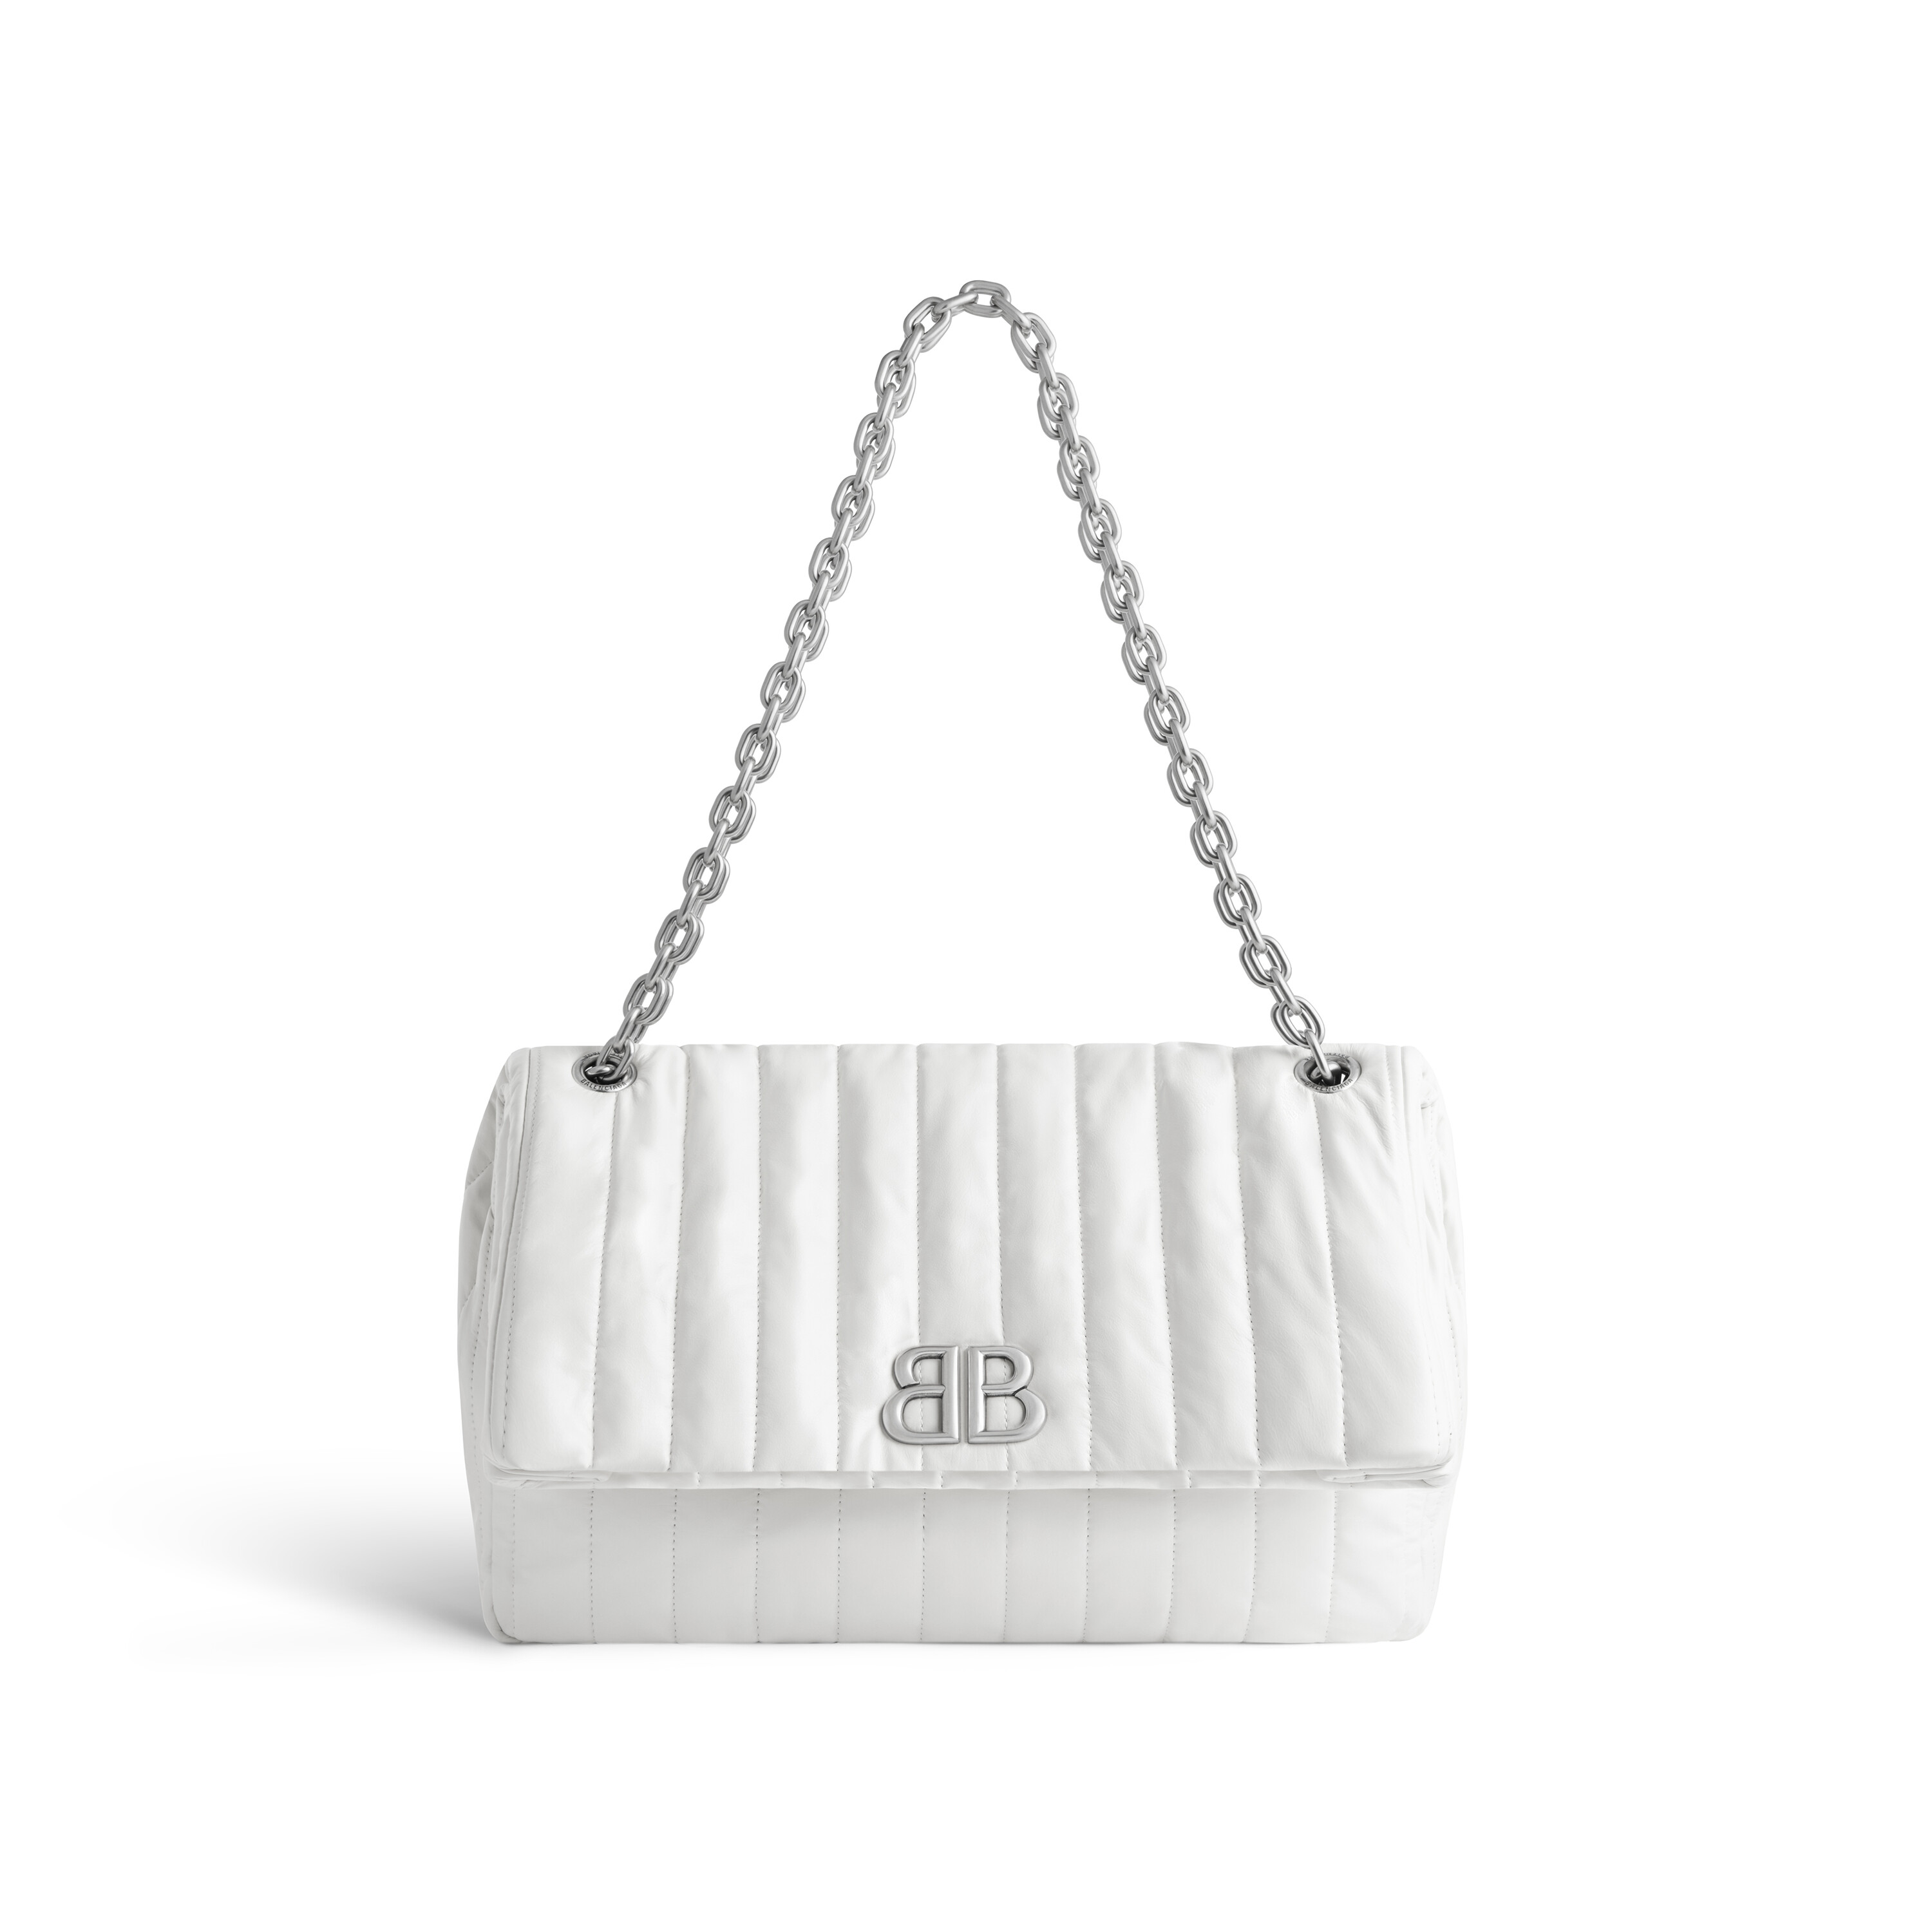 Chanel Pre-owned Women's Leather Clutch Bag - White - One Size